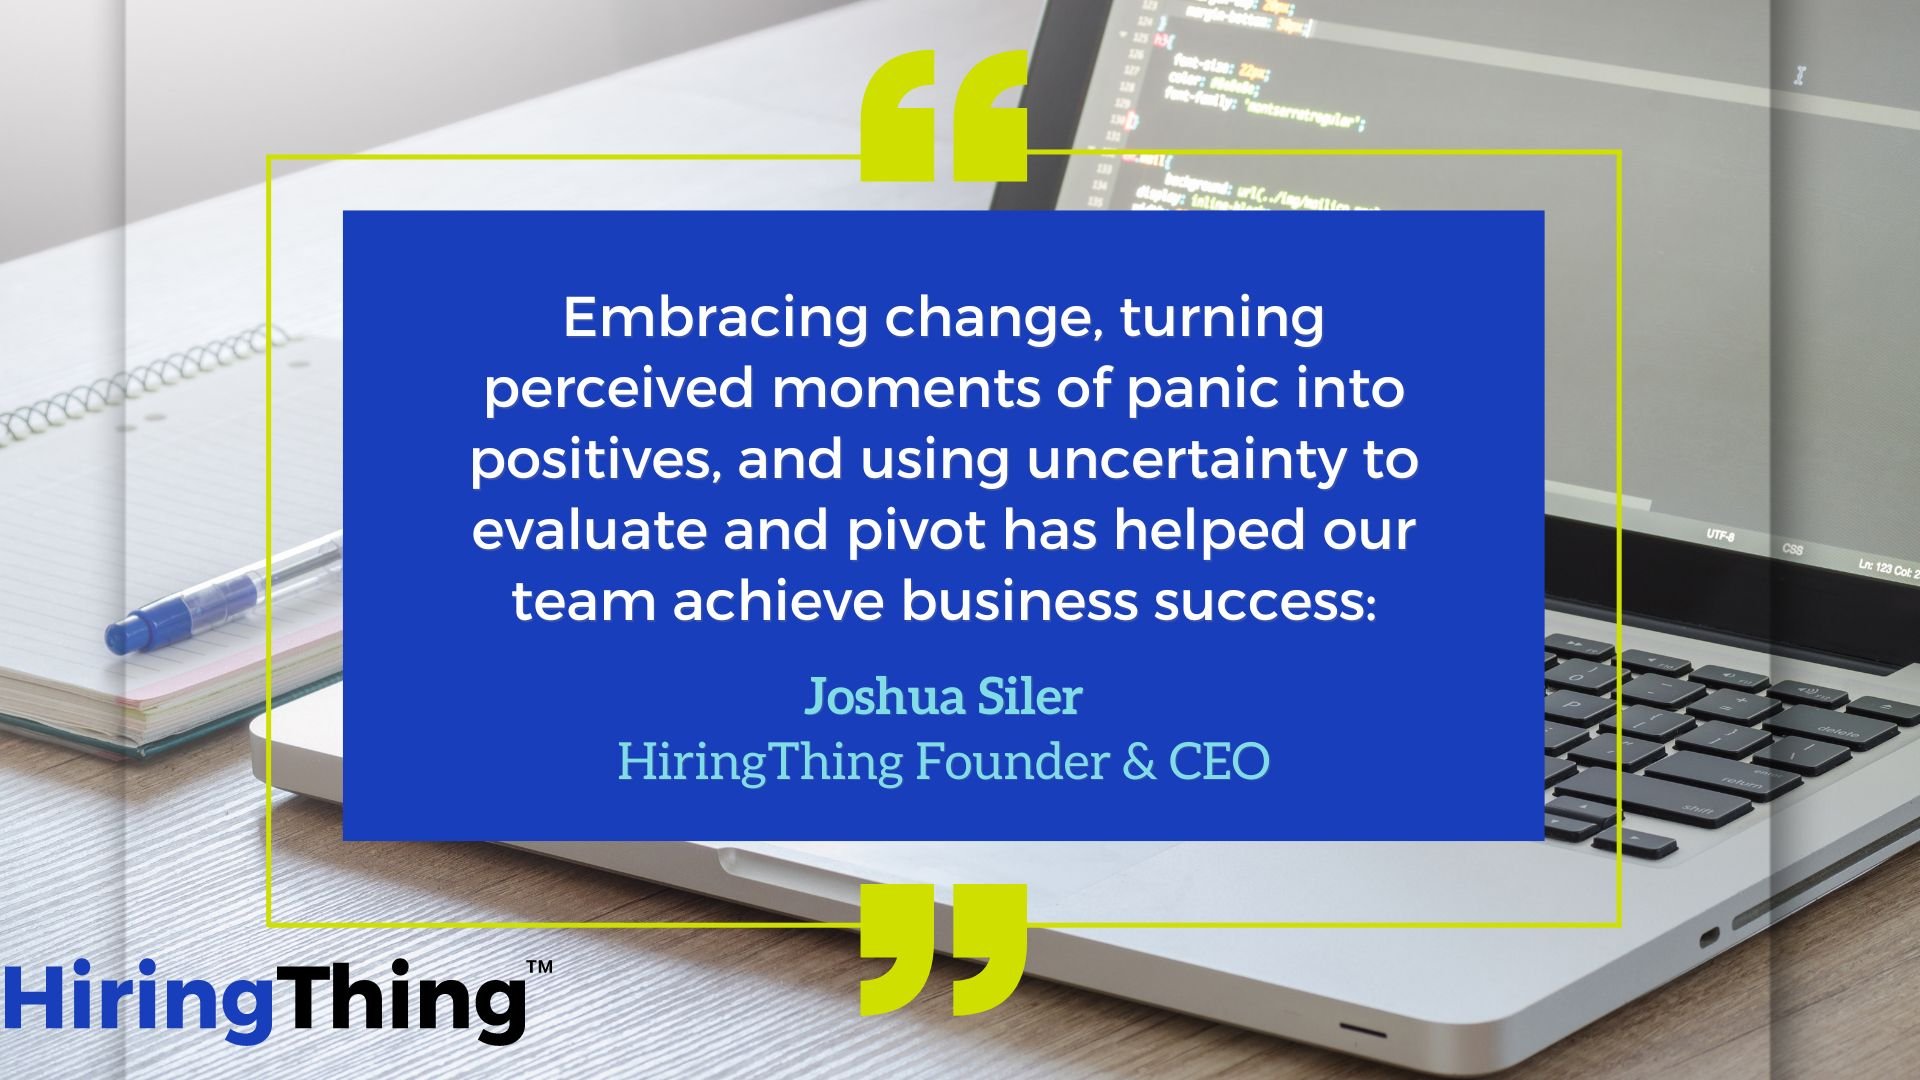 Embracing change, turning perceived moments of panic into positives, and using uncertainty to evaluate and pivot has helped our team achieve business success: